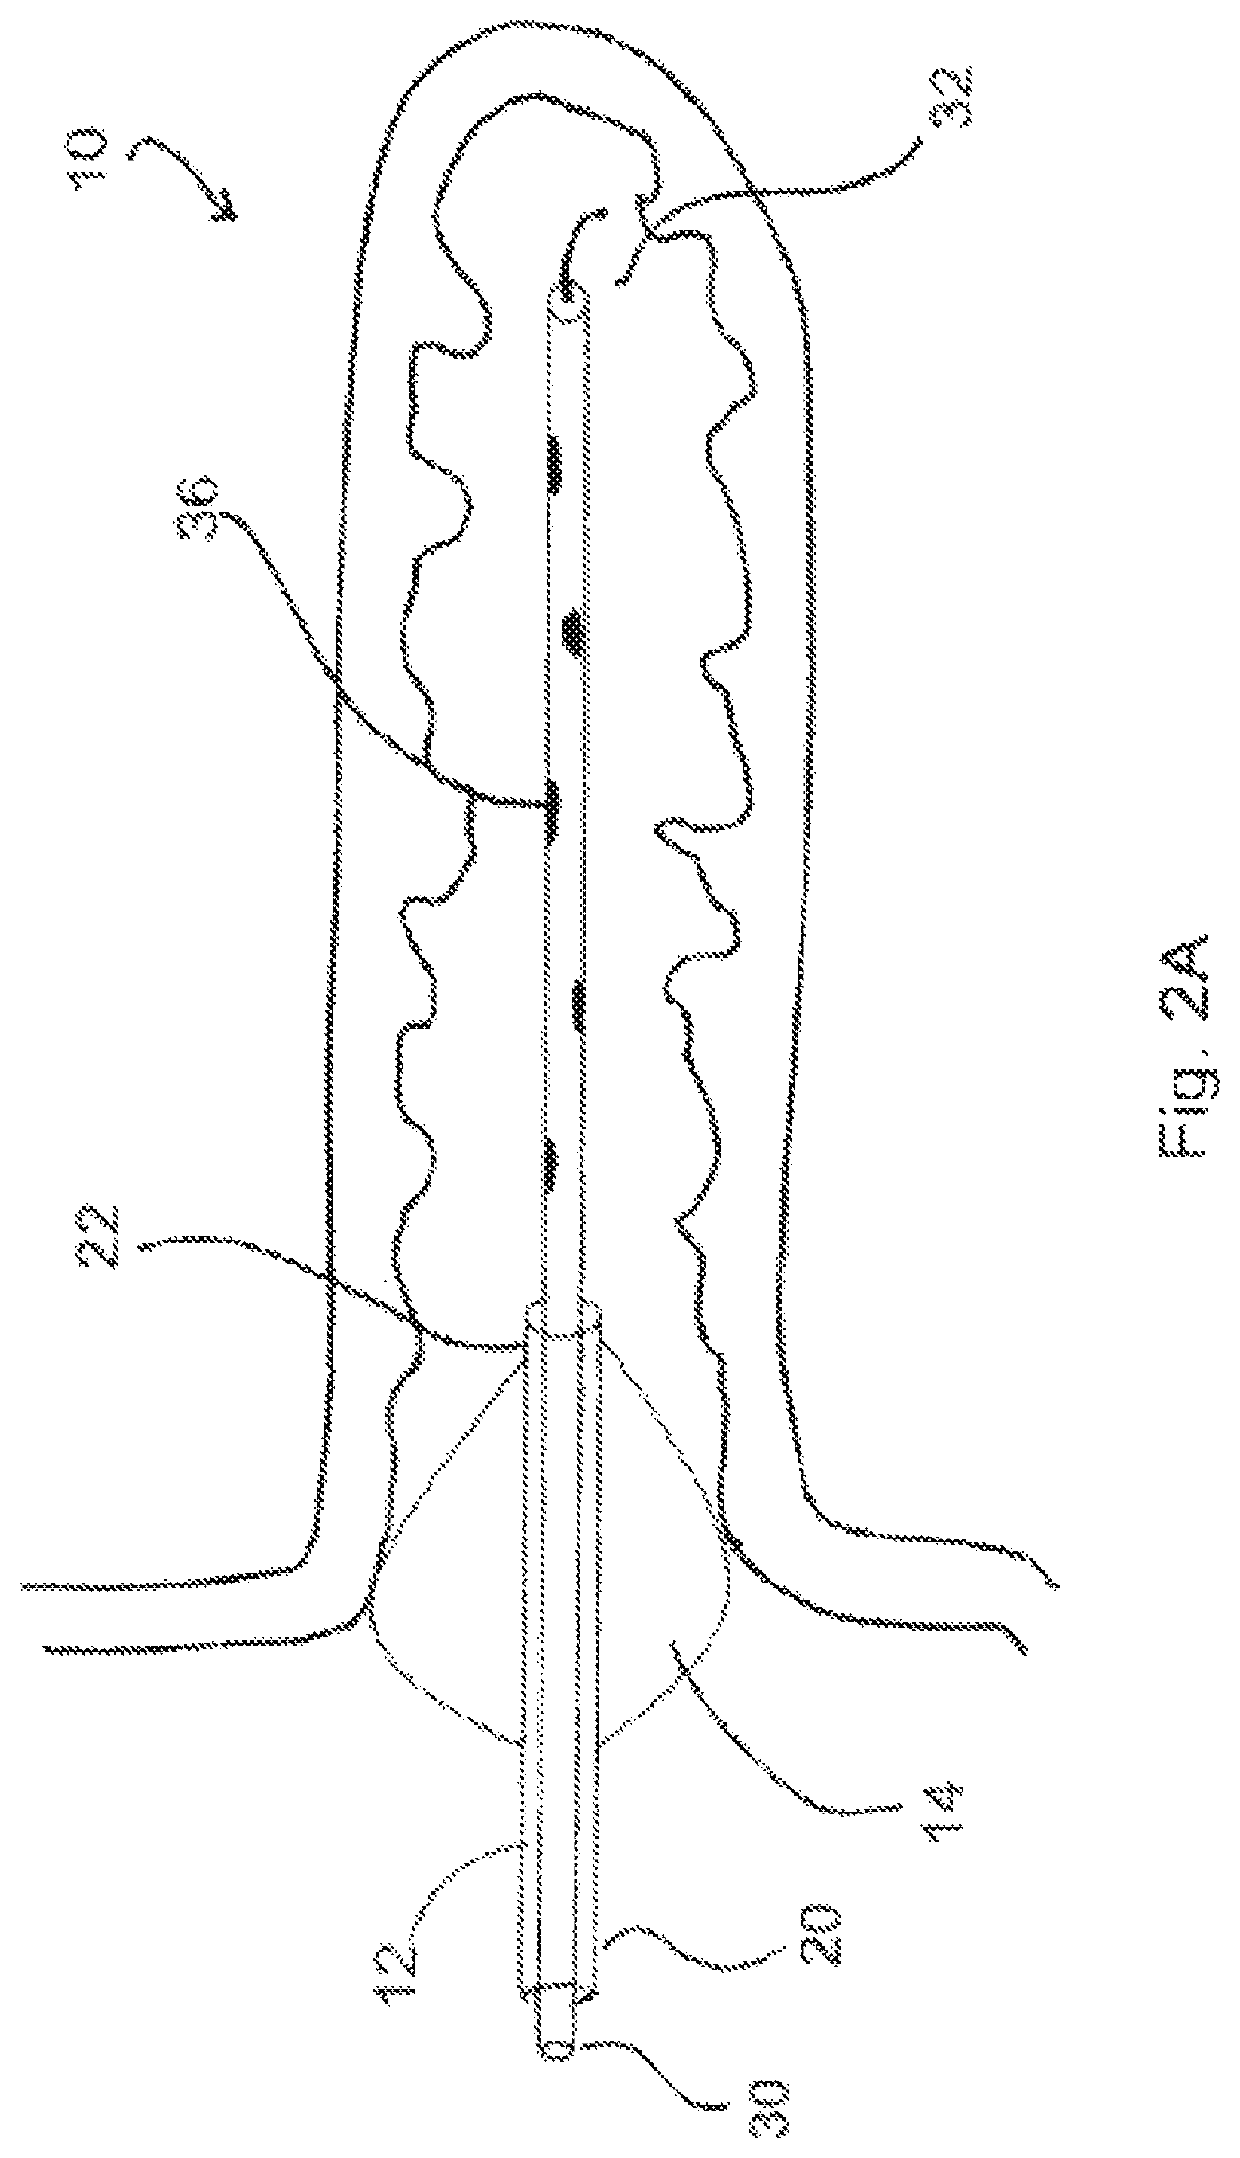 Devices, systems, and methods for atrial appendage occlusion using light cure